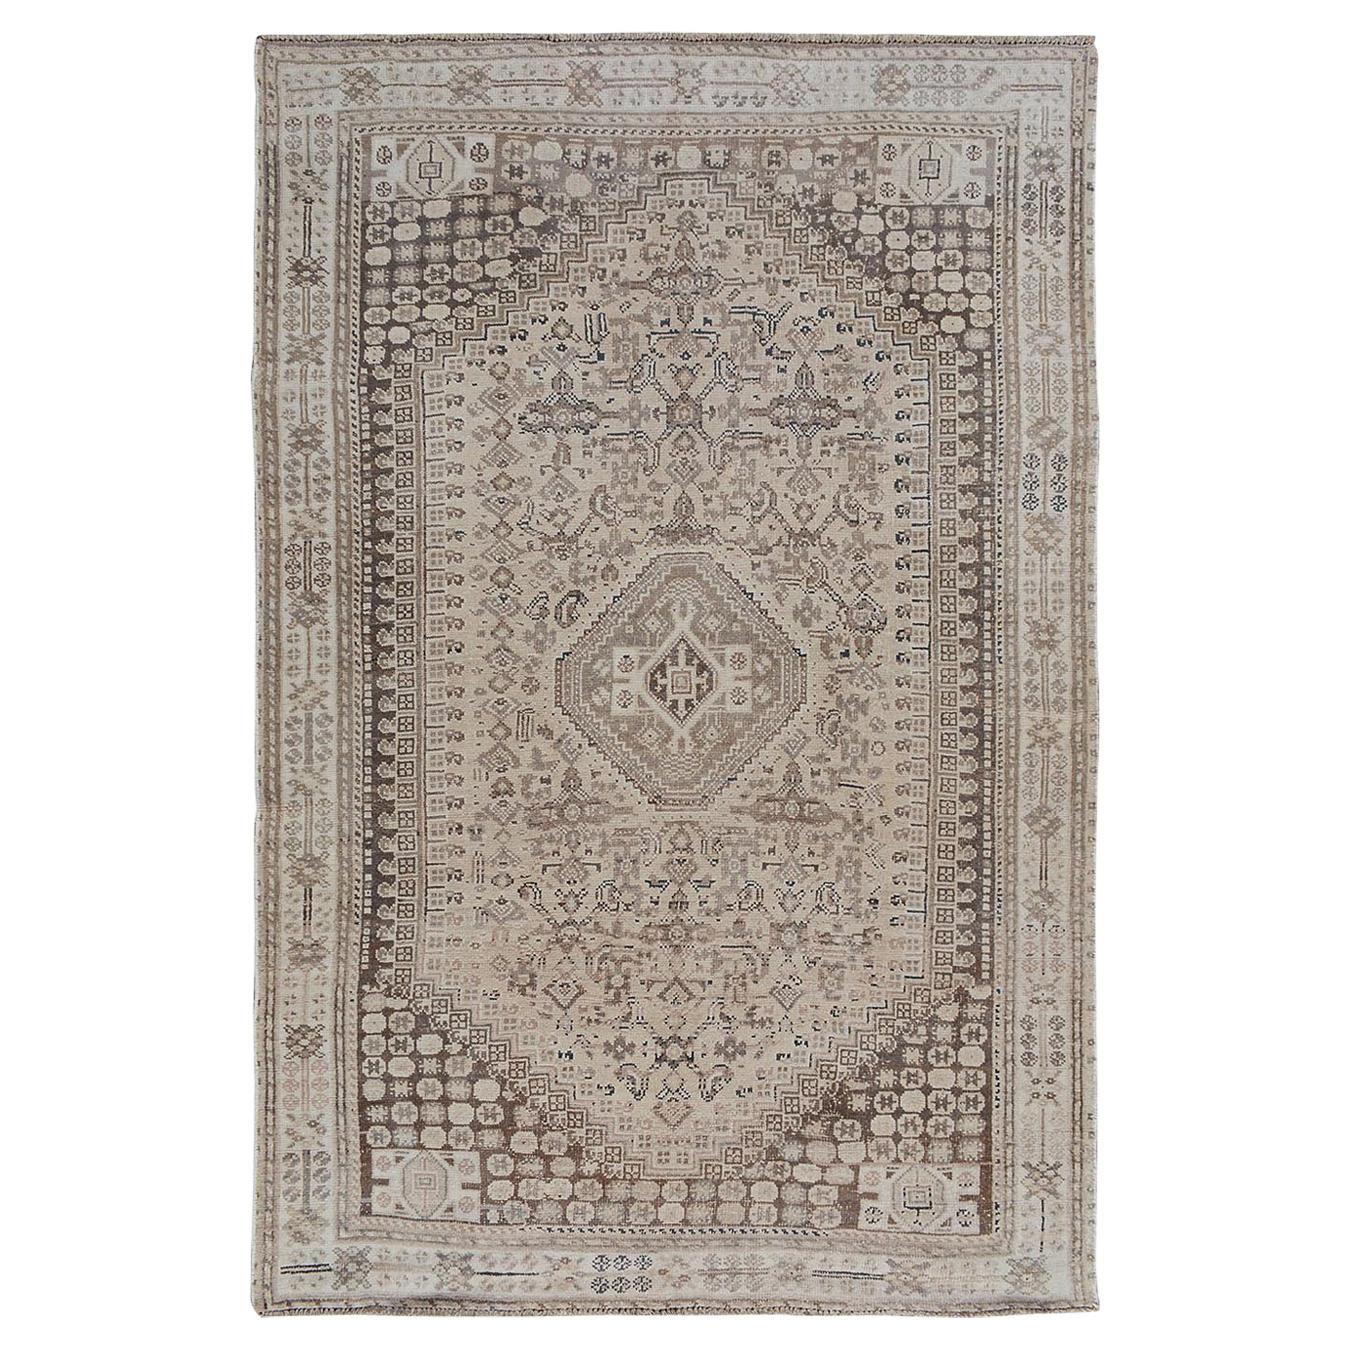 Natural Colors Old and Worn Down Persian Qashqai Pure Wool Hand Knotted Rug